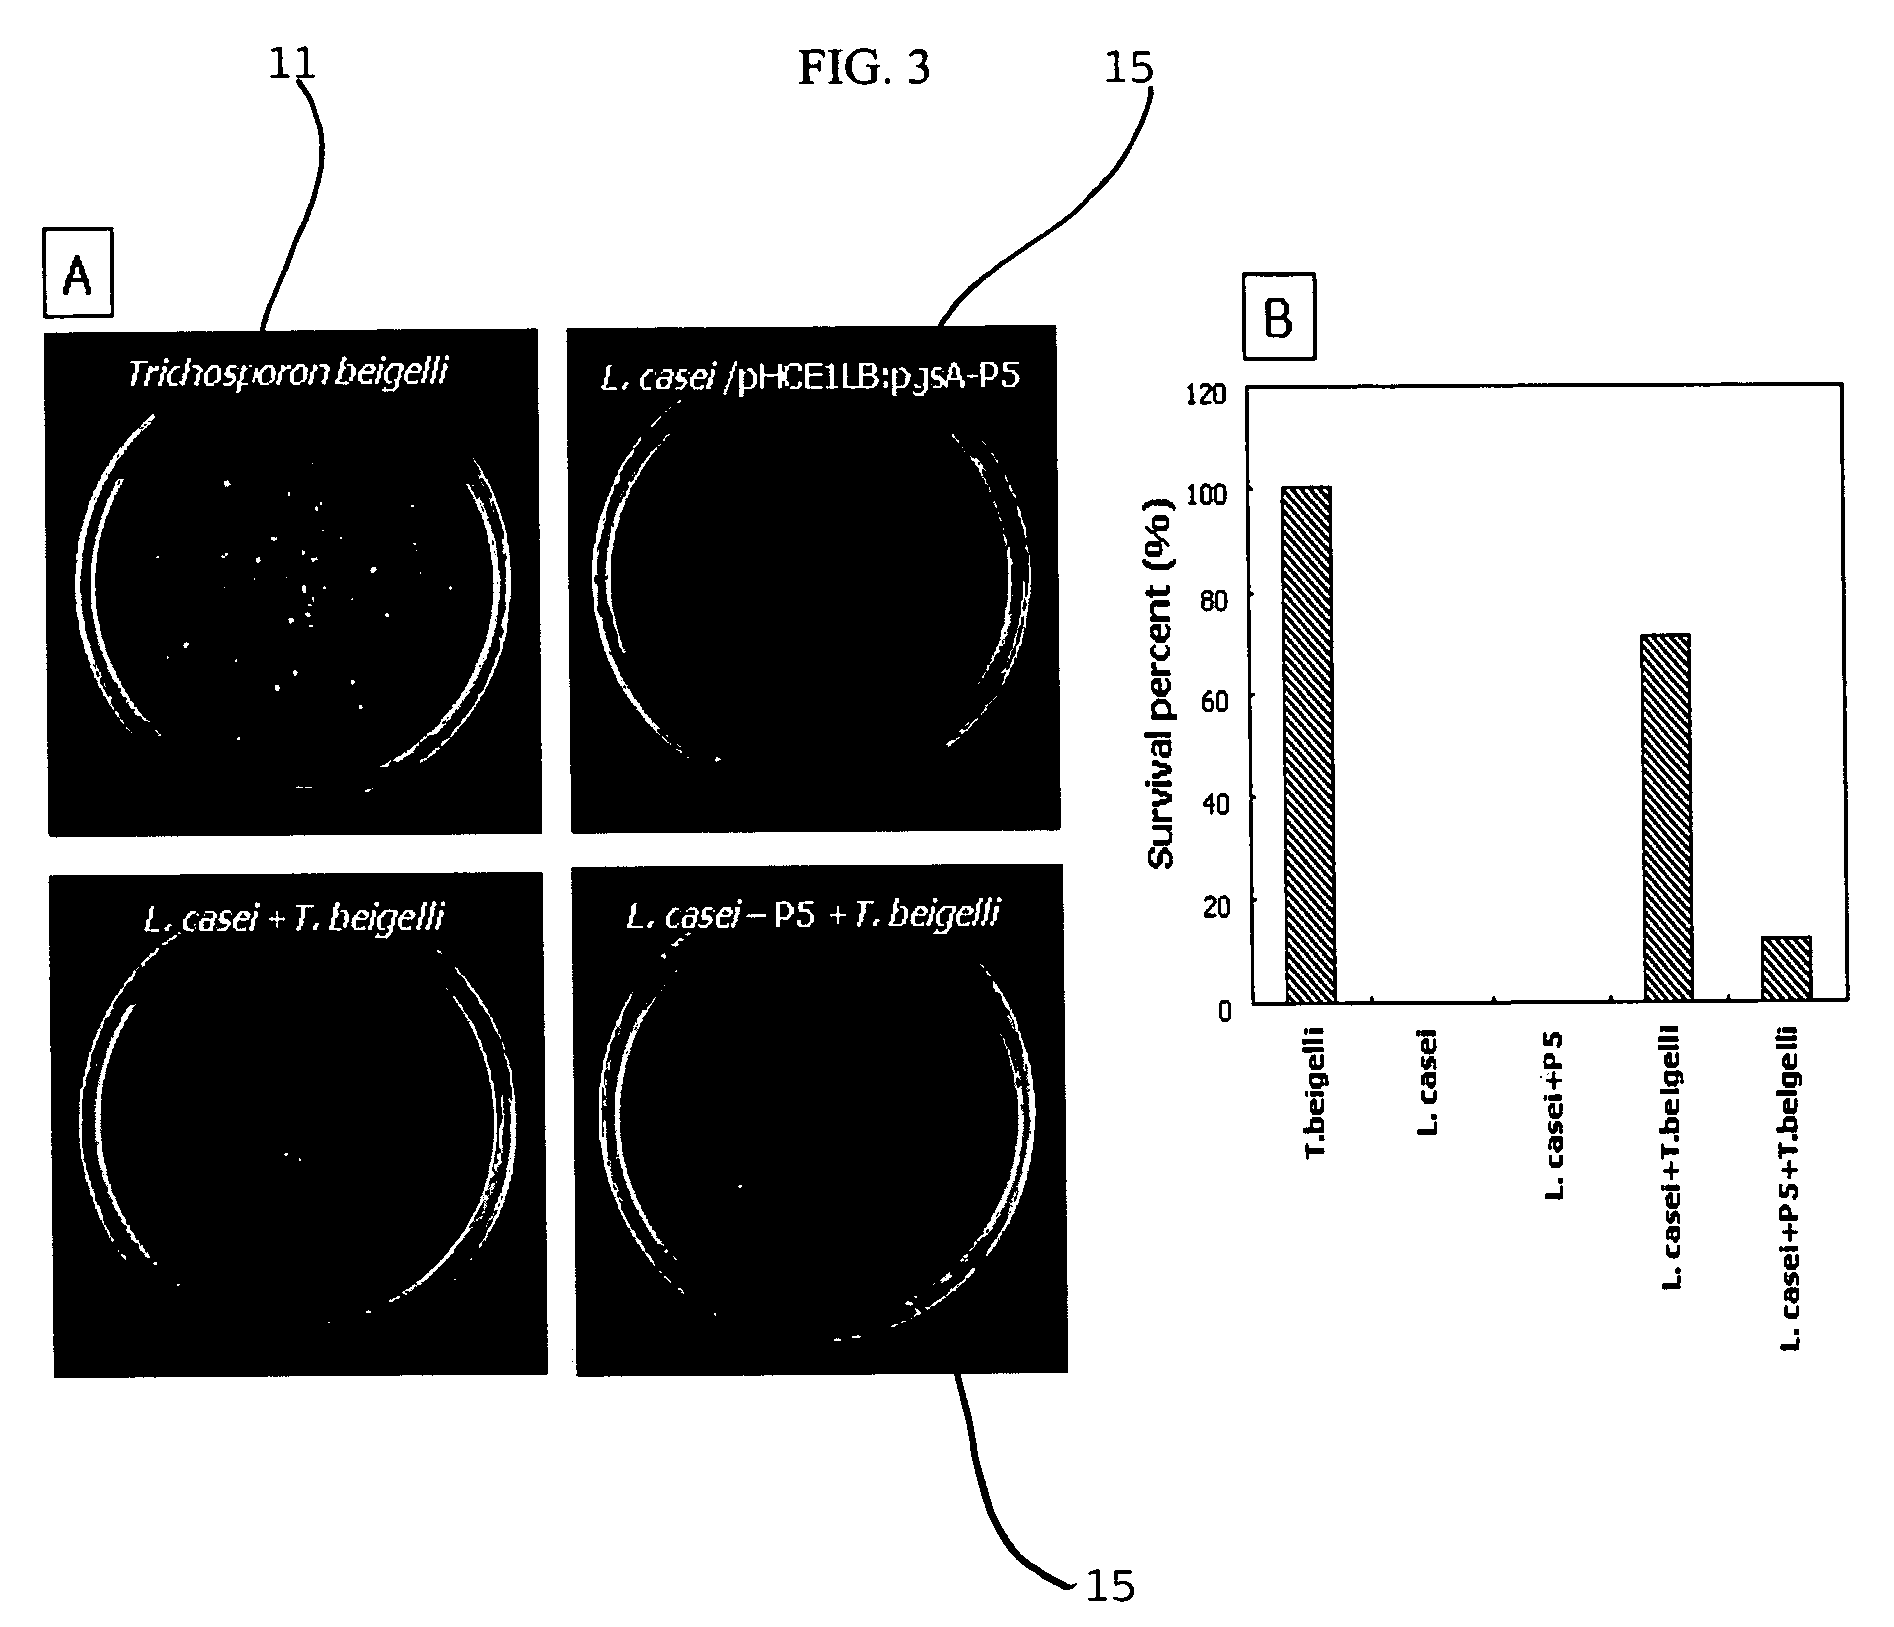 Surface expression method of peptides P5 and Anal3 using the gene encoding poly-gamma-glutamate synthetase